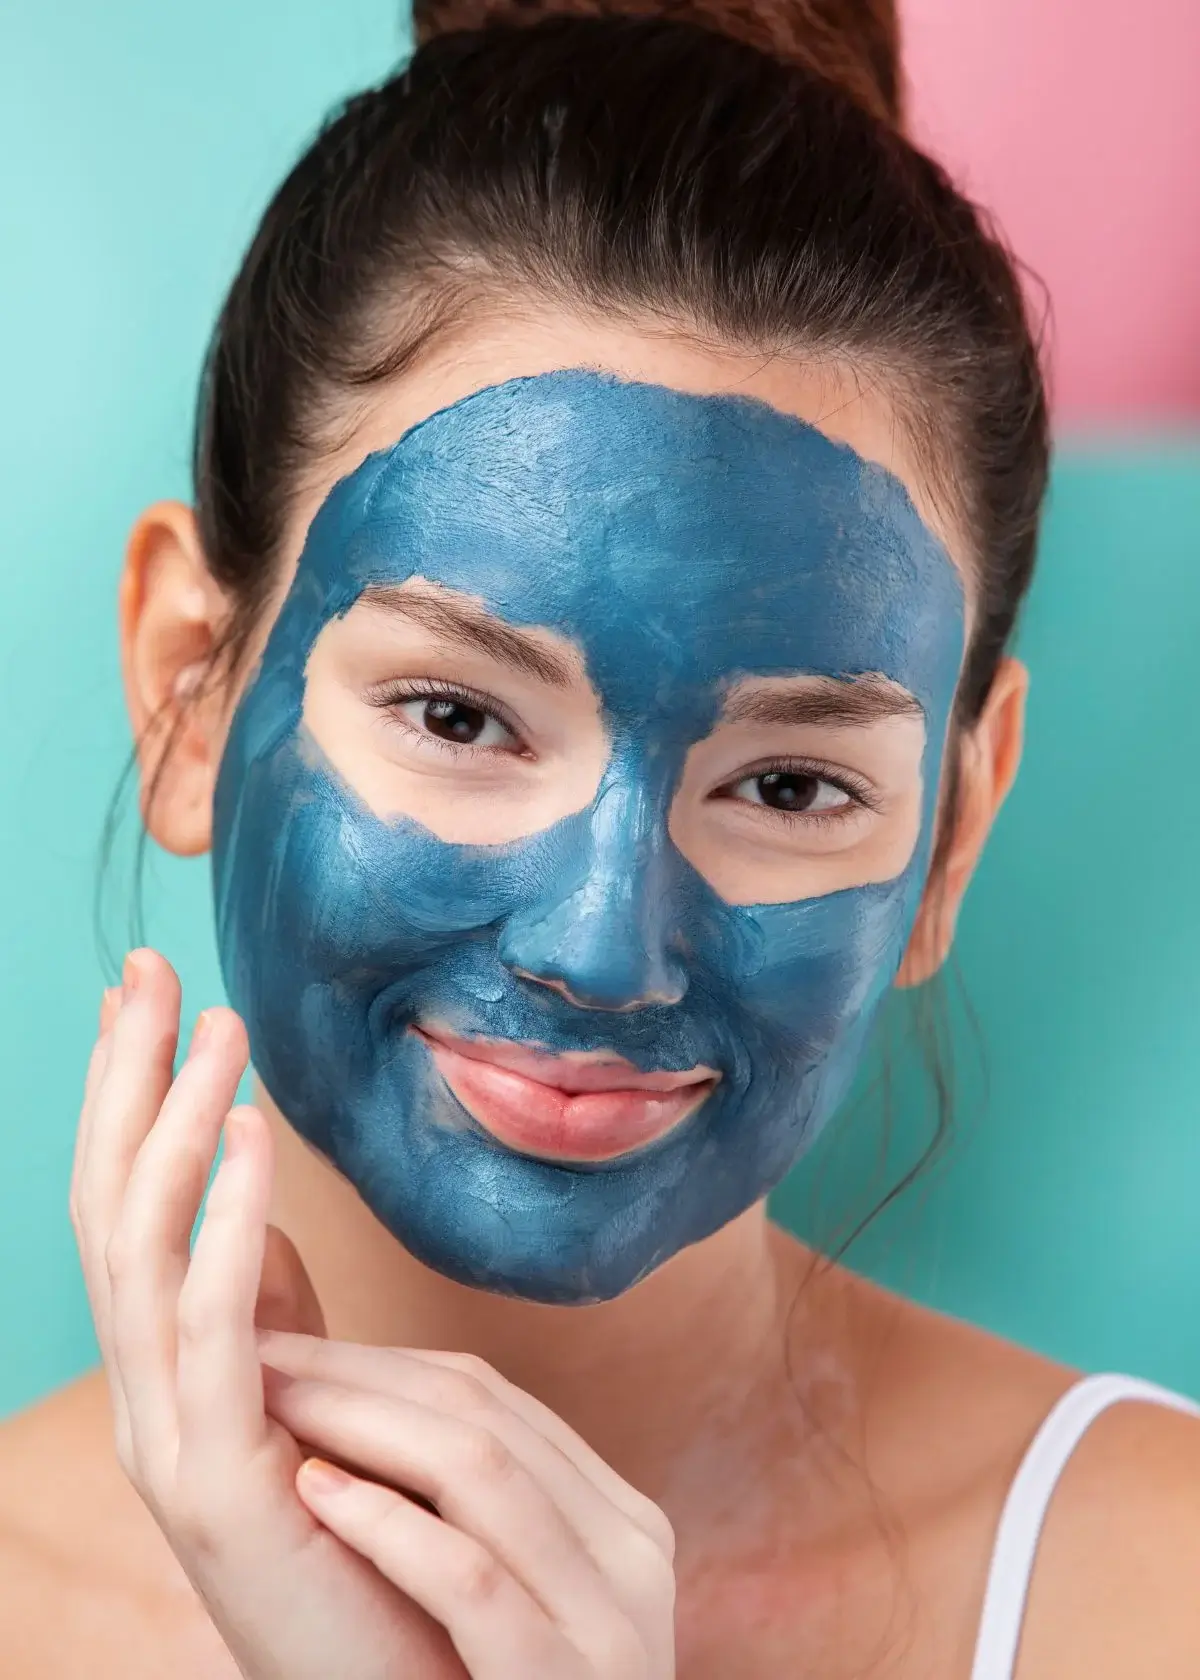 How often should I use a Korean face mask for optimal results?